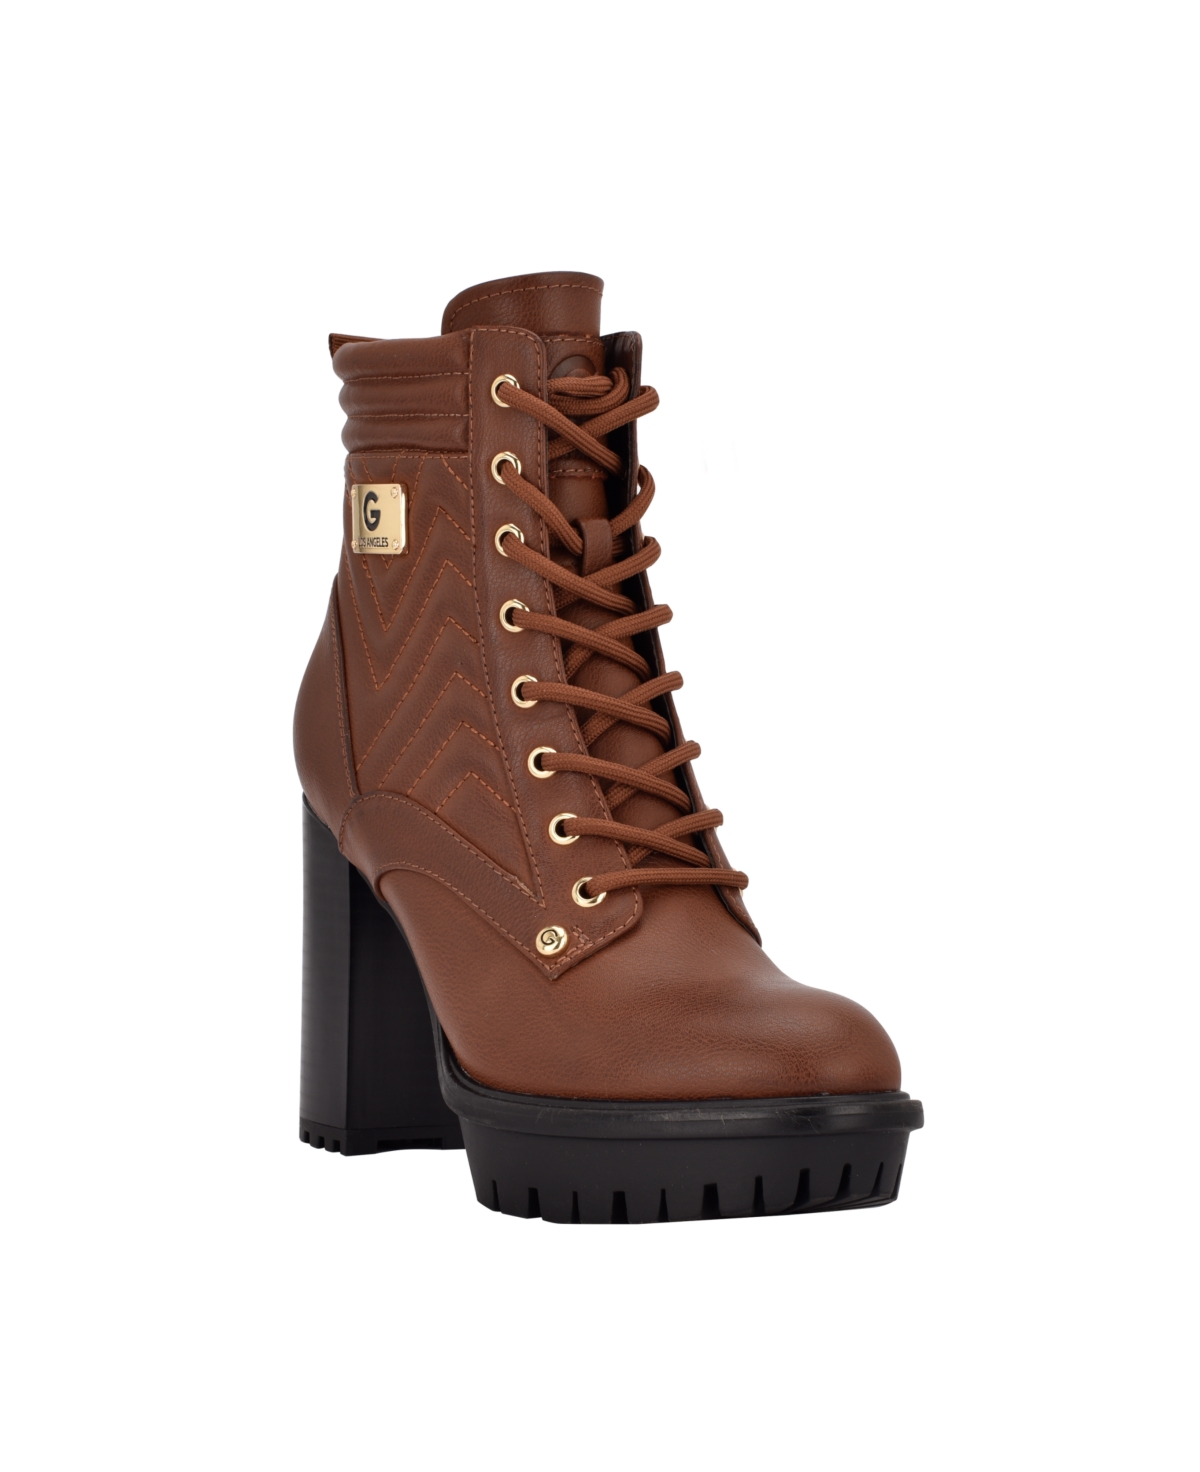 Gbg Los Angeles Women's Sellia Heeled Lug Sole Quilted Hiker Boots Women's Shoes In Medium Brown